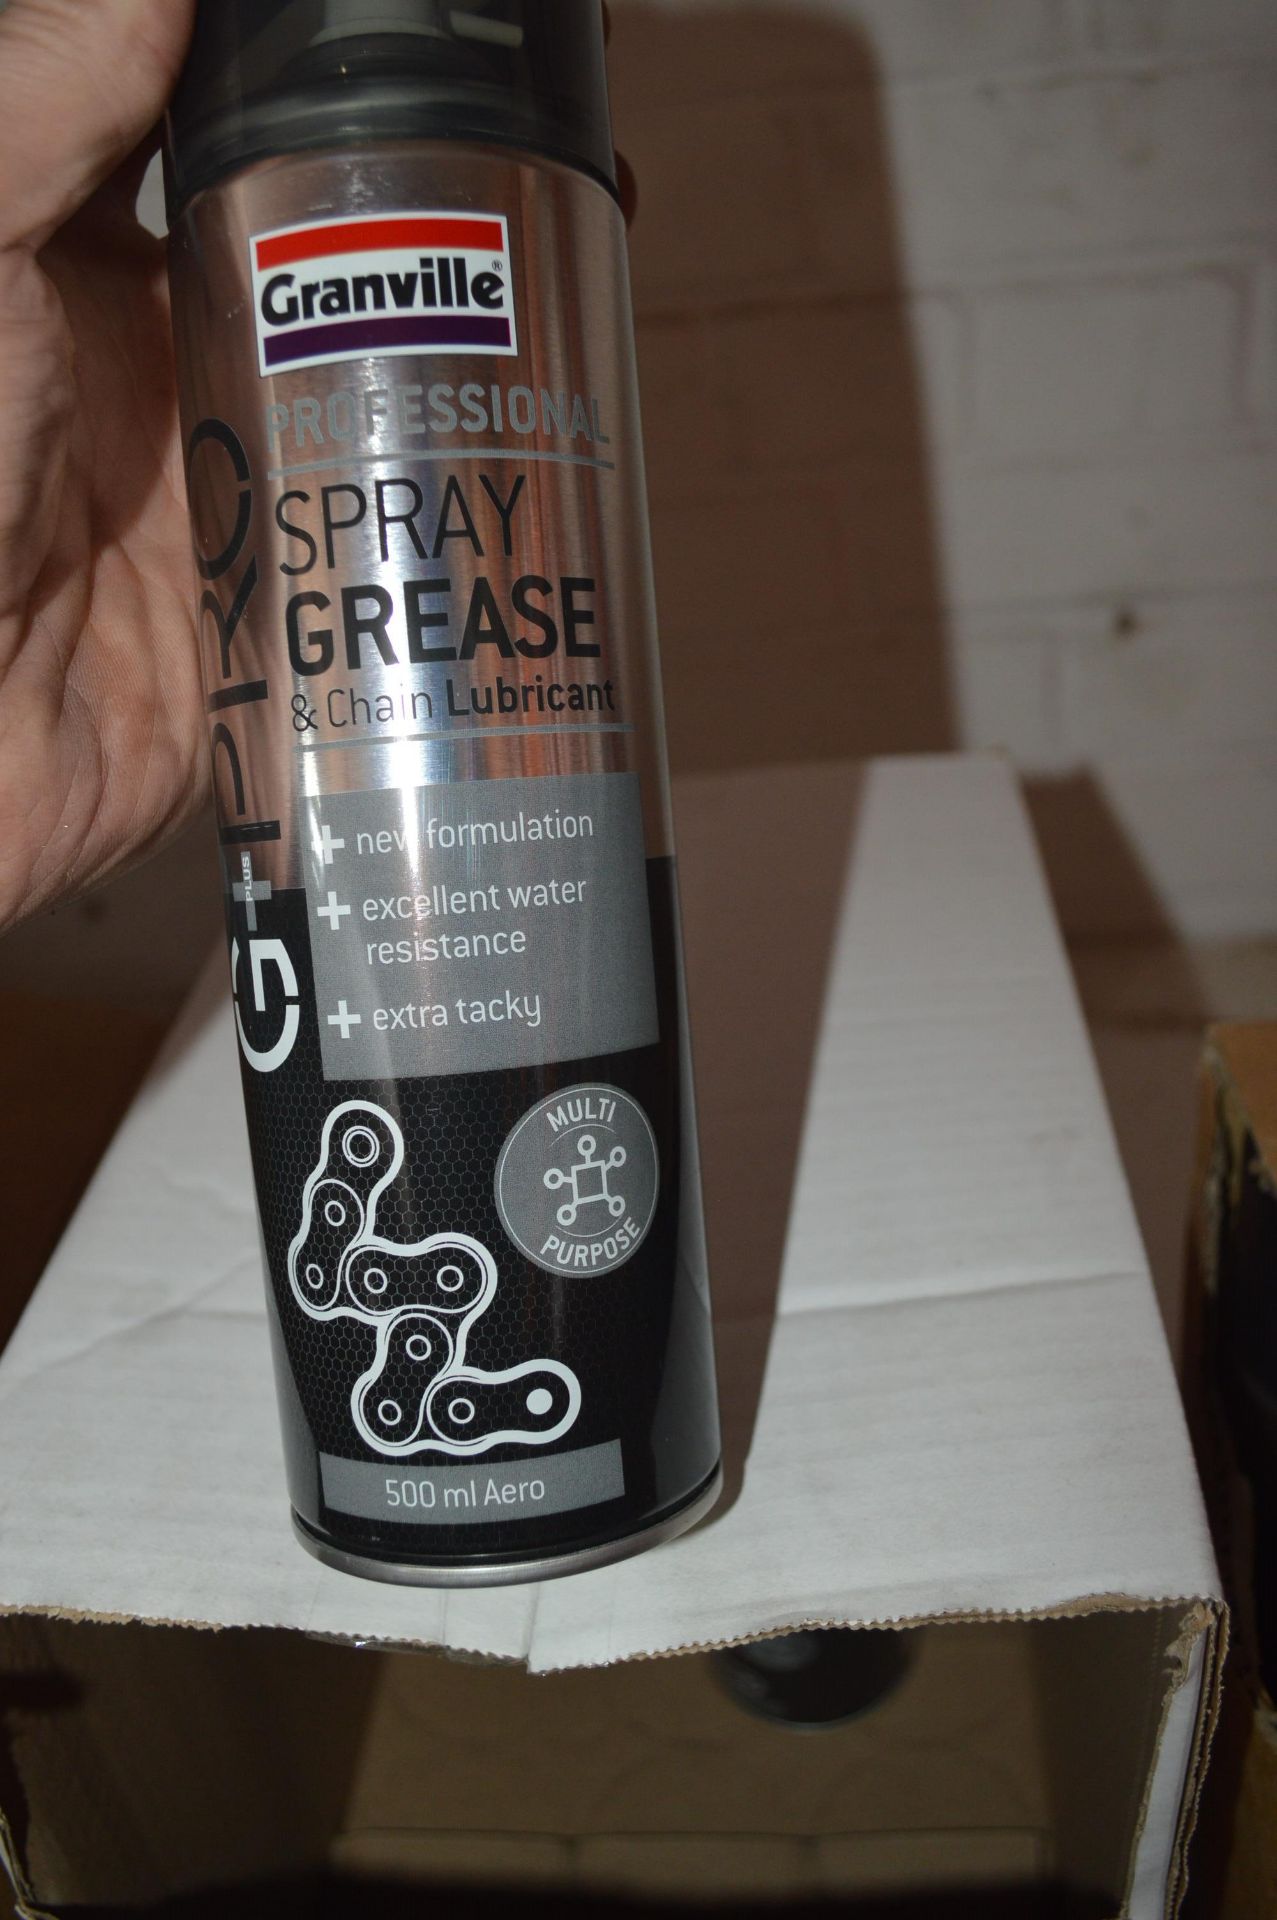 *5x 500ml of Granville Spray Grease and Chain Lubricant